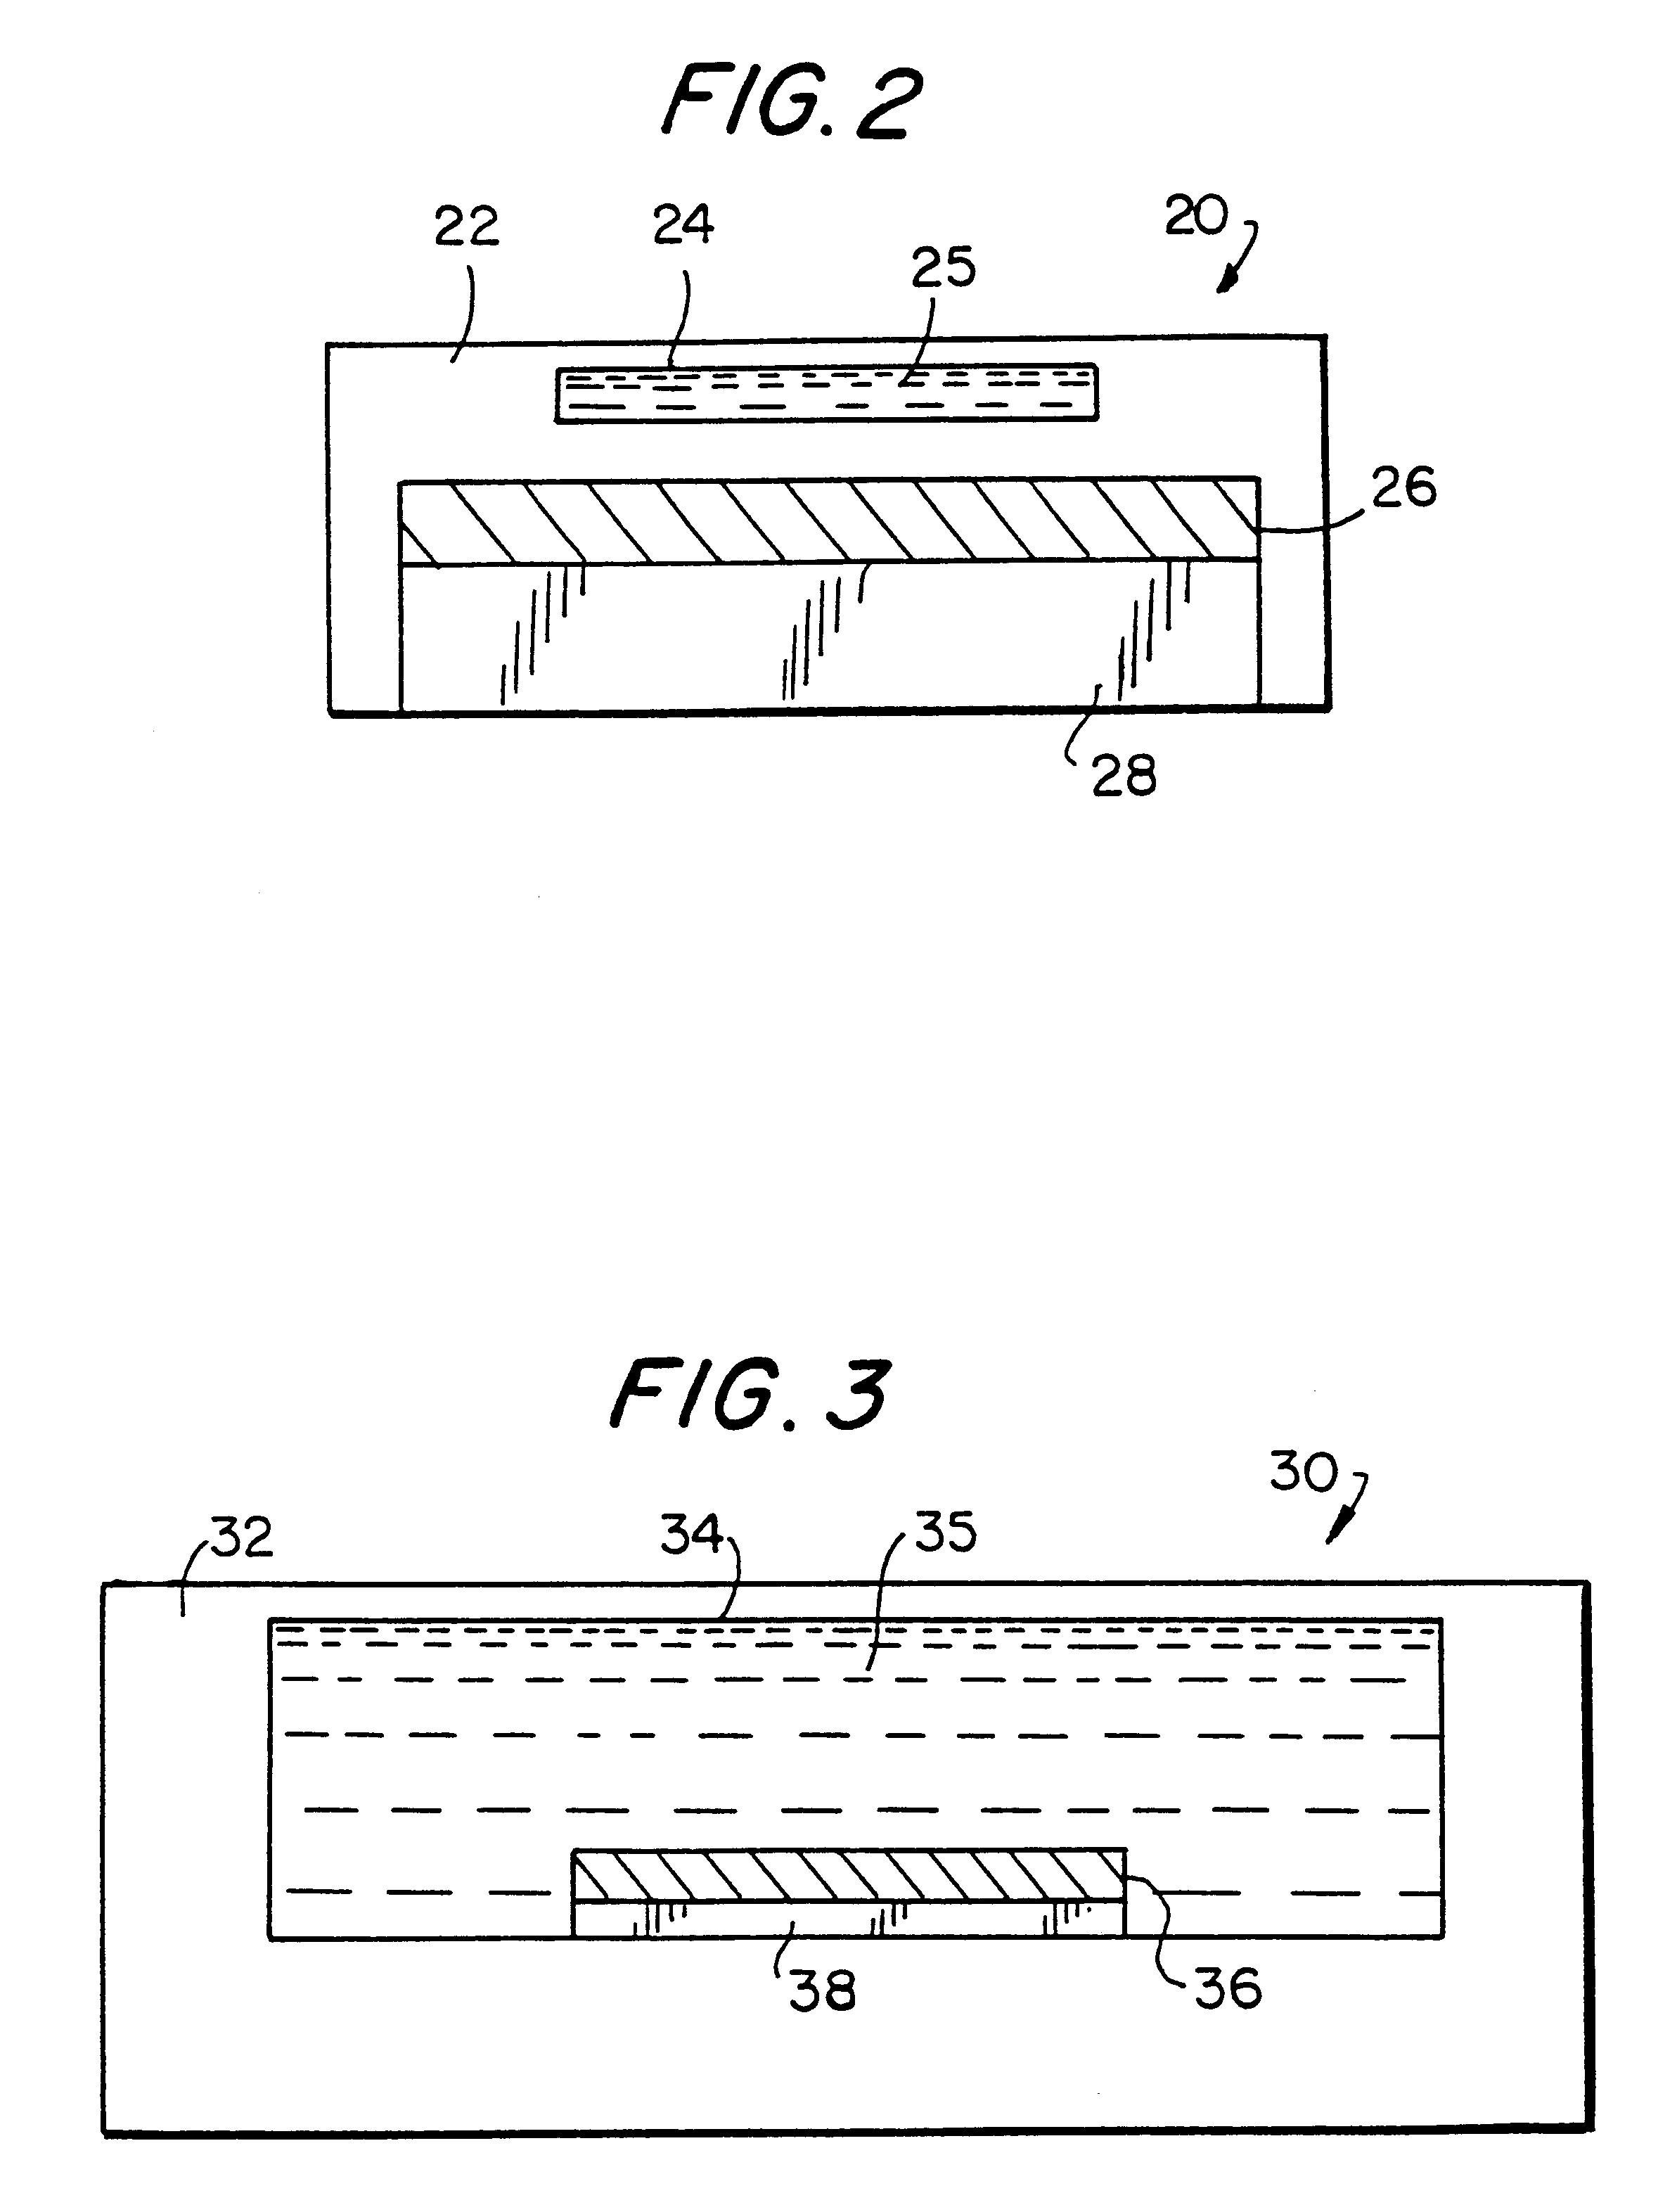 Assay sonication apparatus and methodology